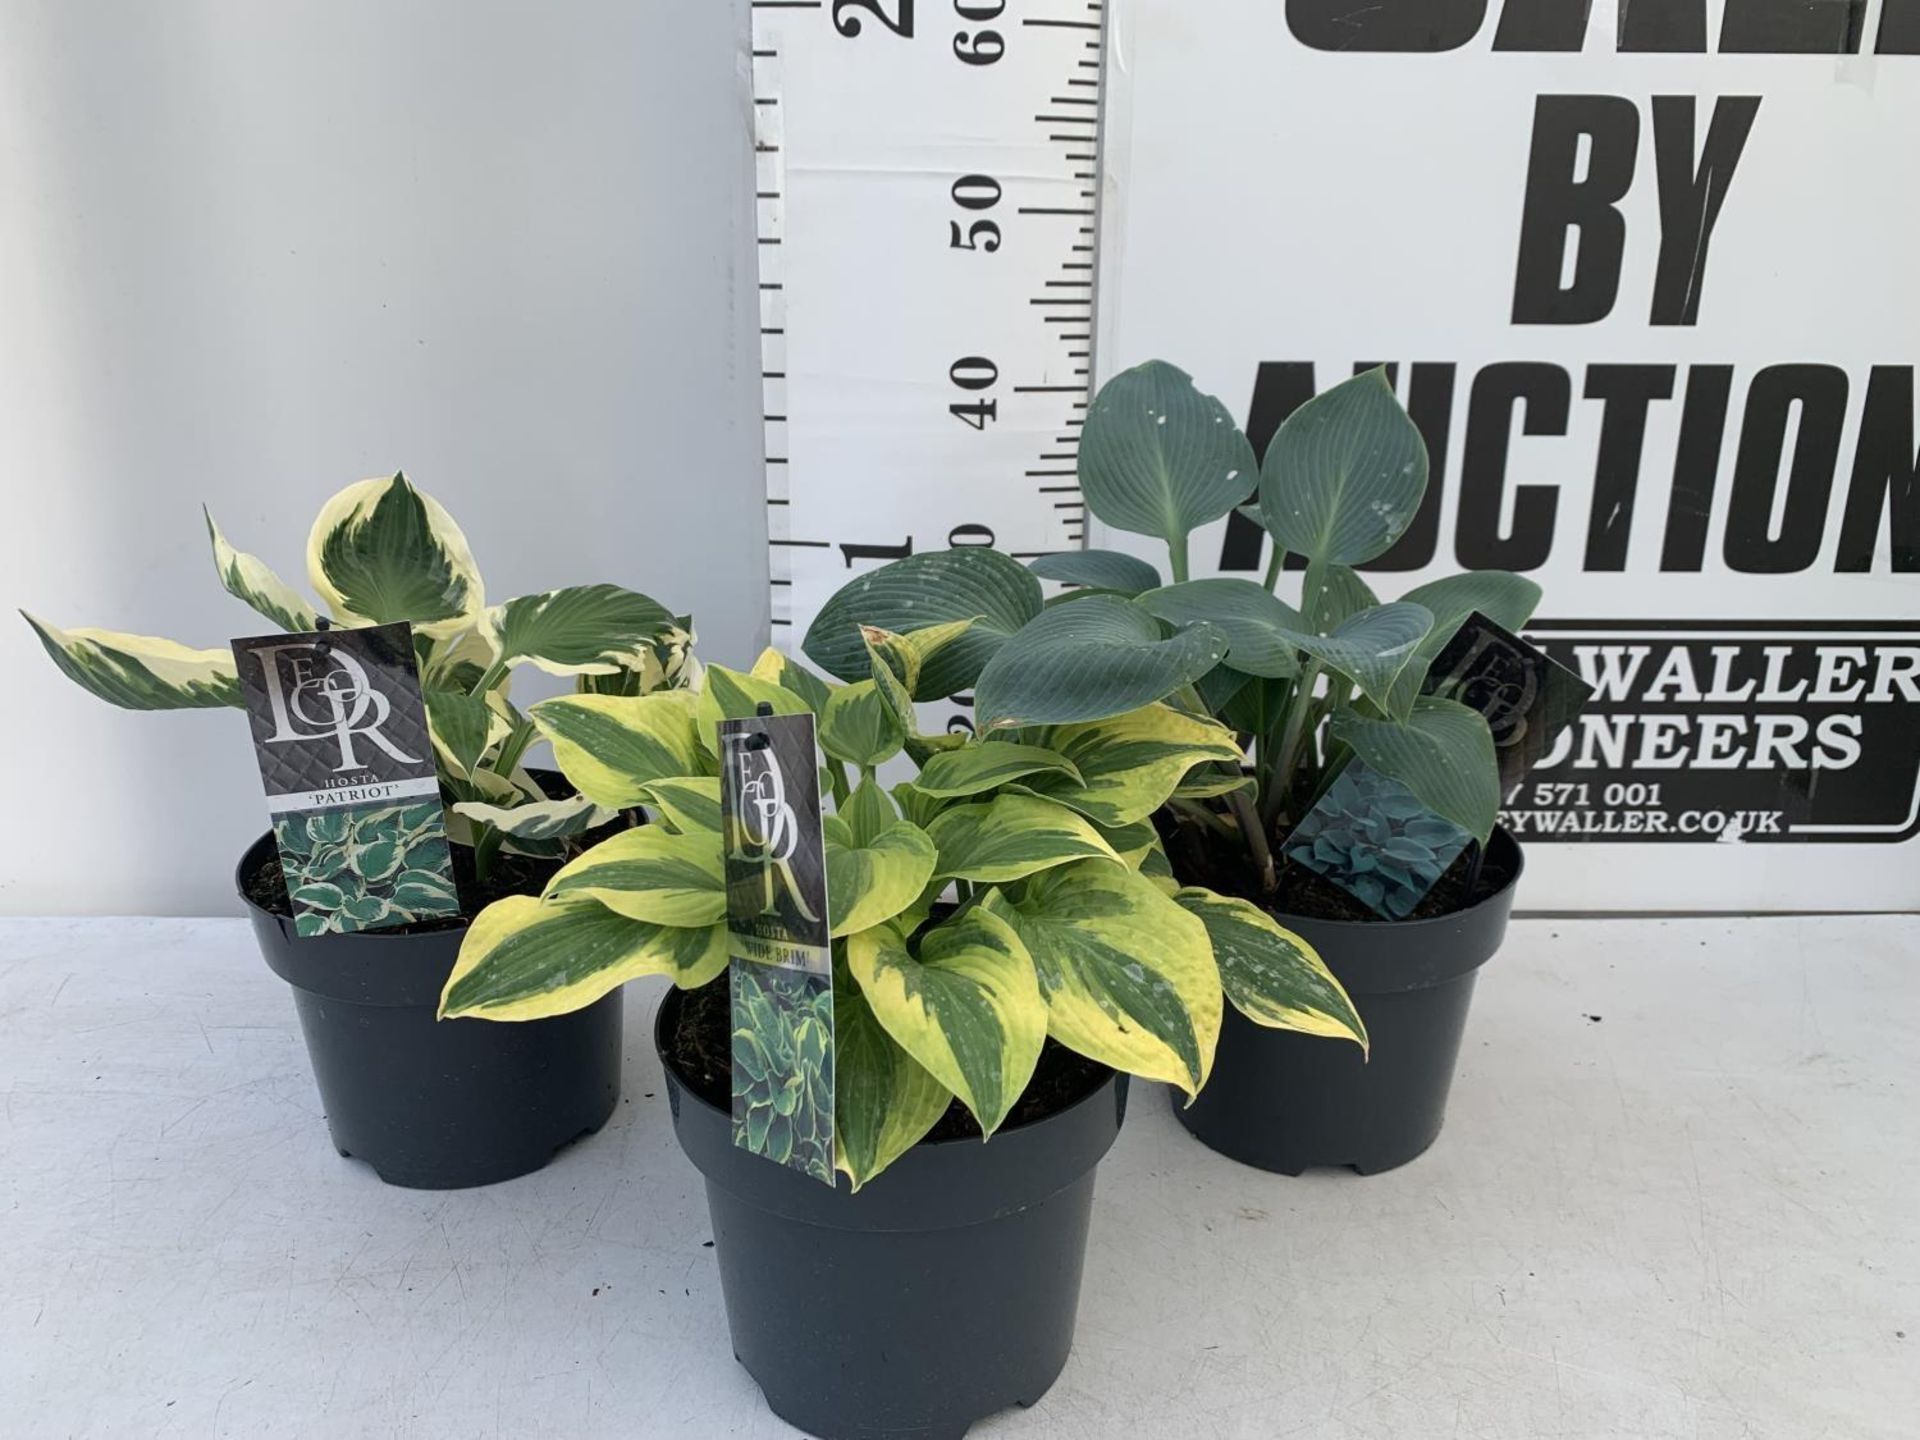 THREE MIXED VARIETY HOSTAS TO INCLUDE WIDE BRIM, HALCYON AND PATRIOT IN 3 LTR POTS 30CM TALL TO BE - Image 2 of 14